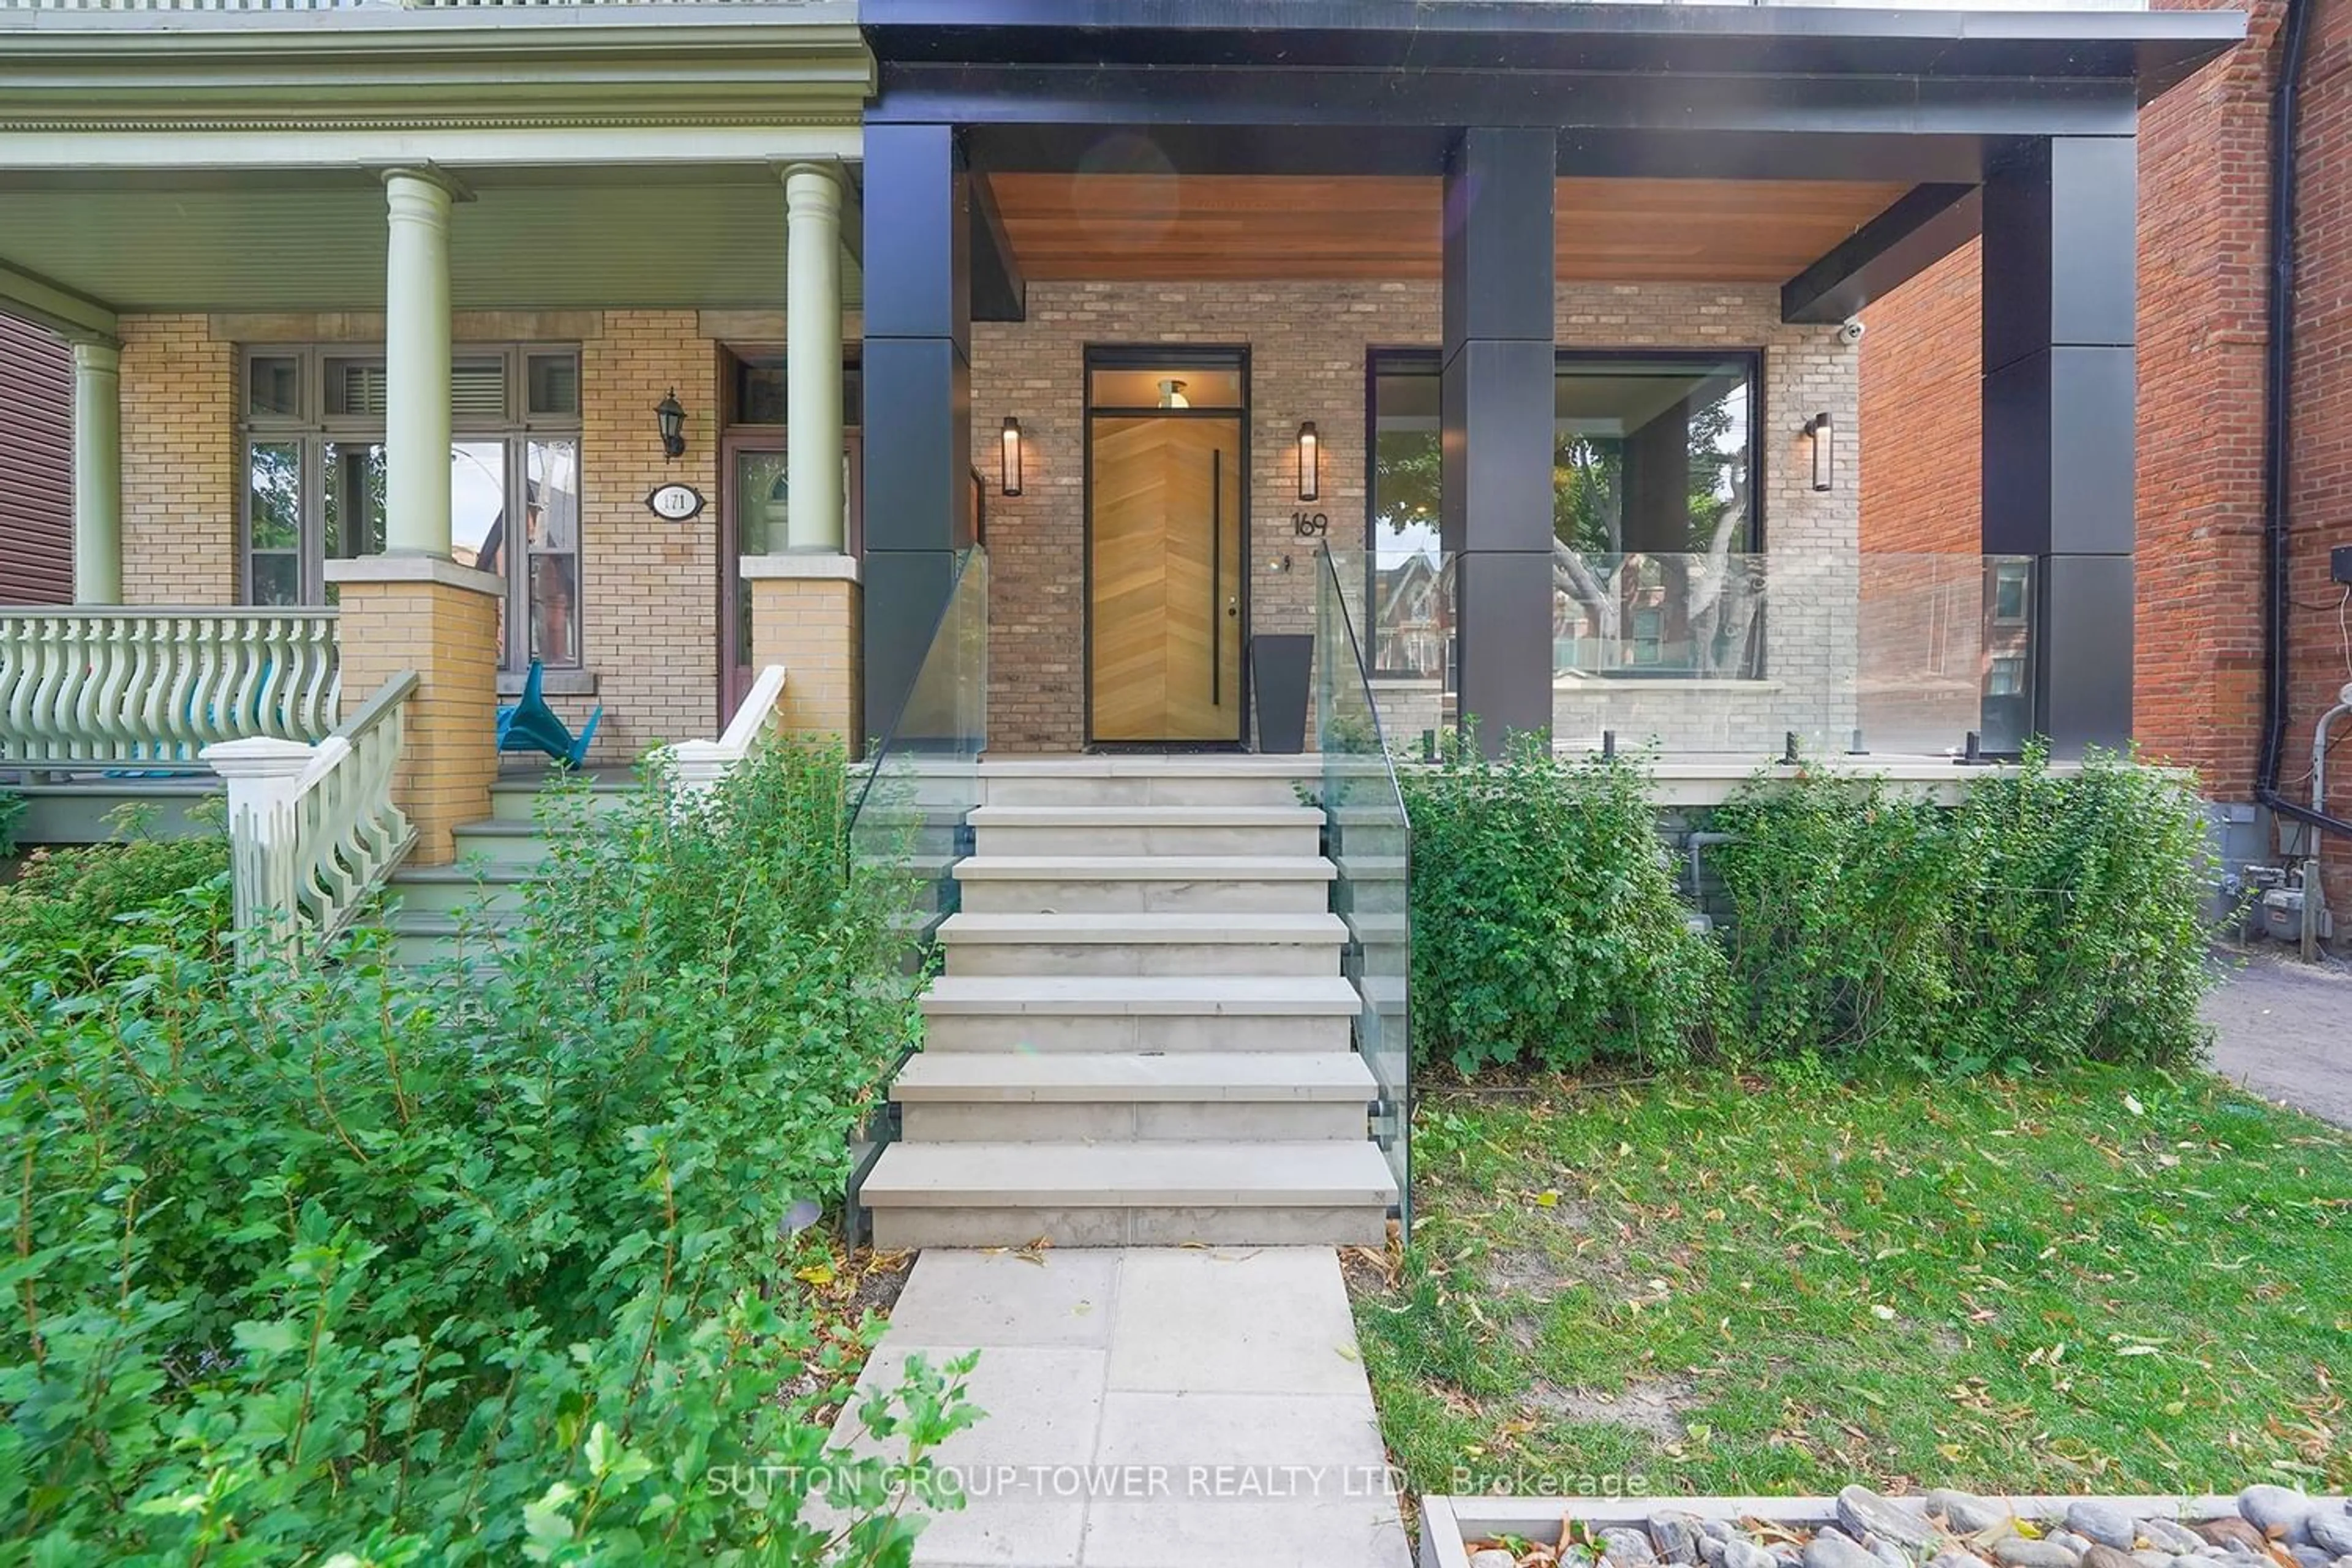 Home with brick exterior material for 169 Strachan Ave, Toronto Ontario M6J 2T1